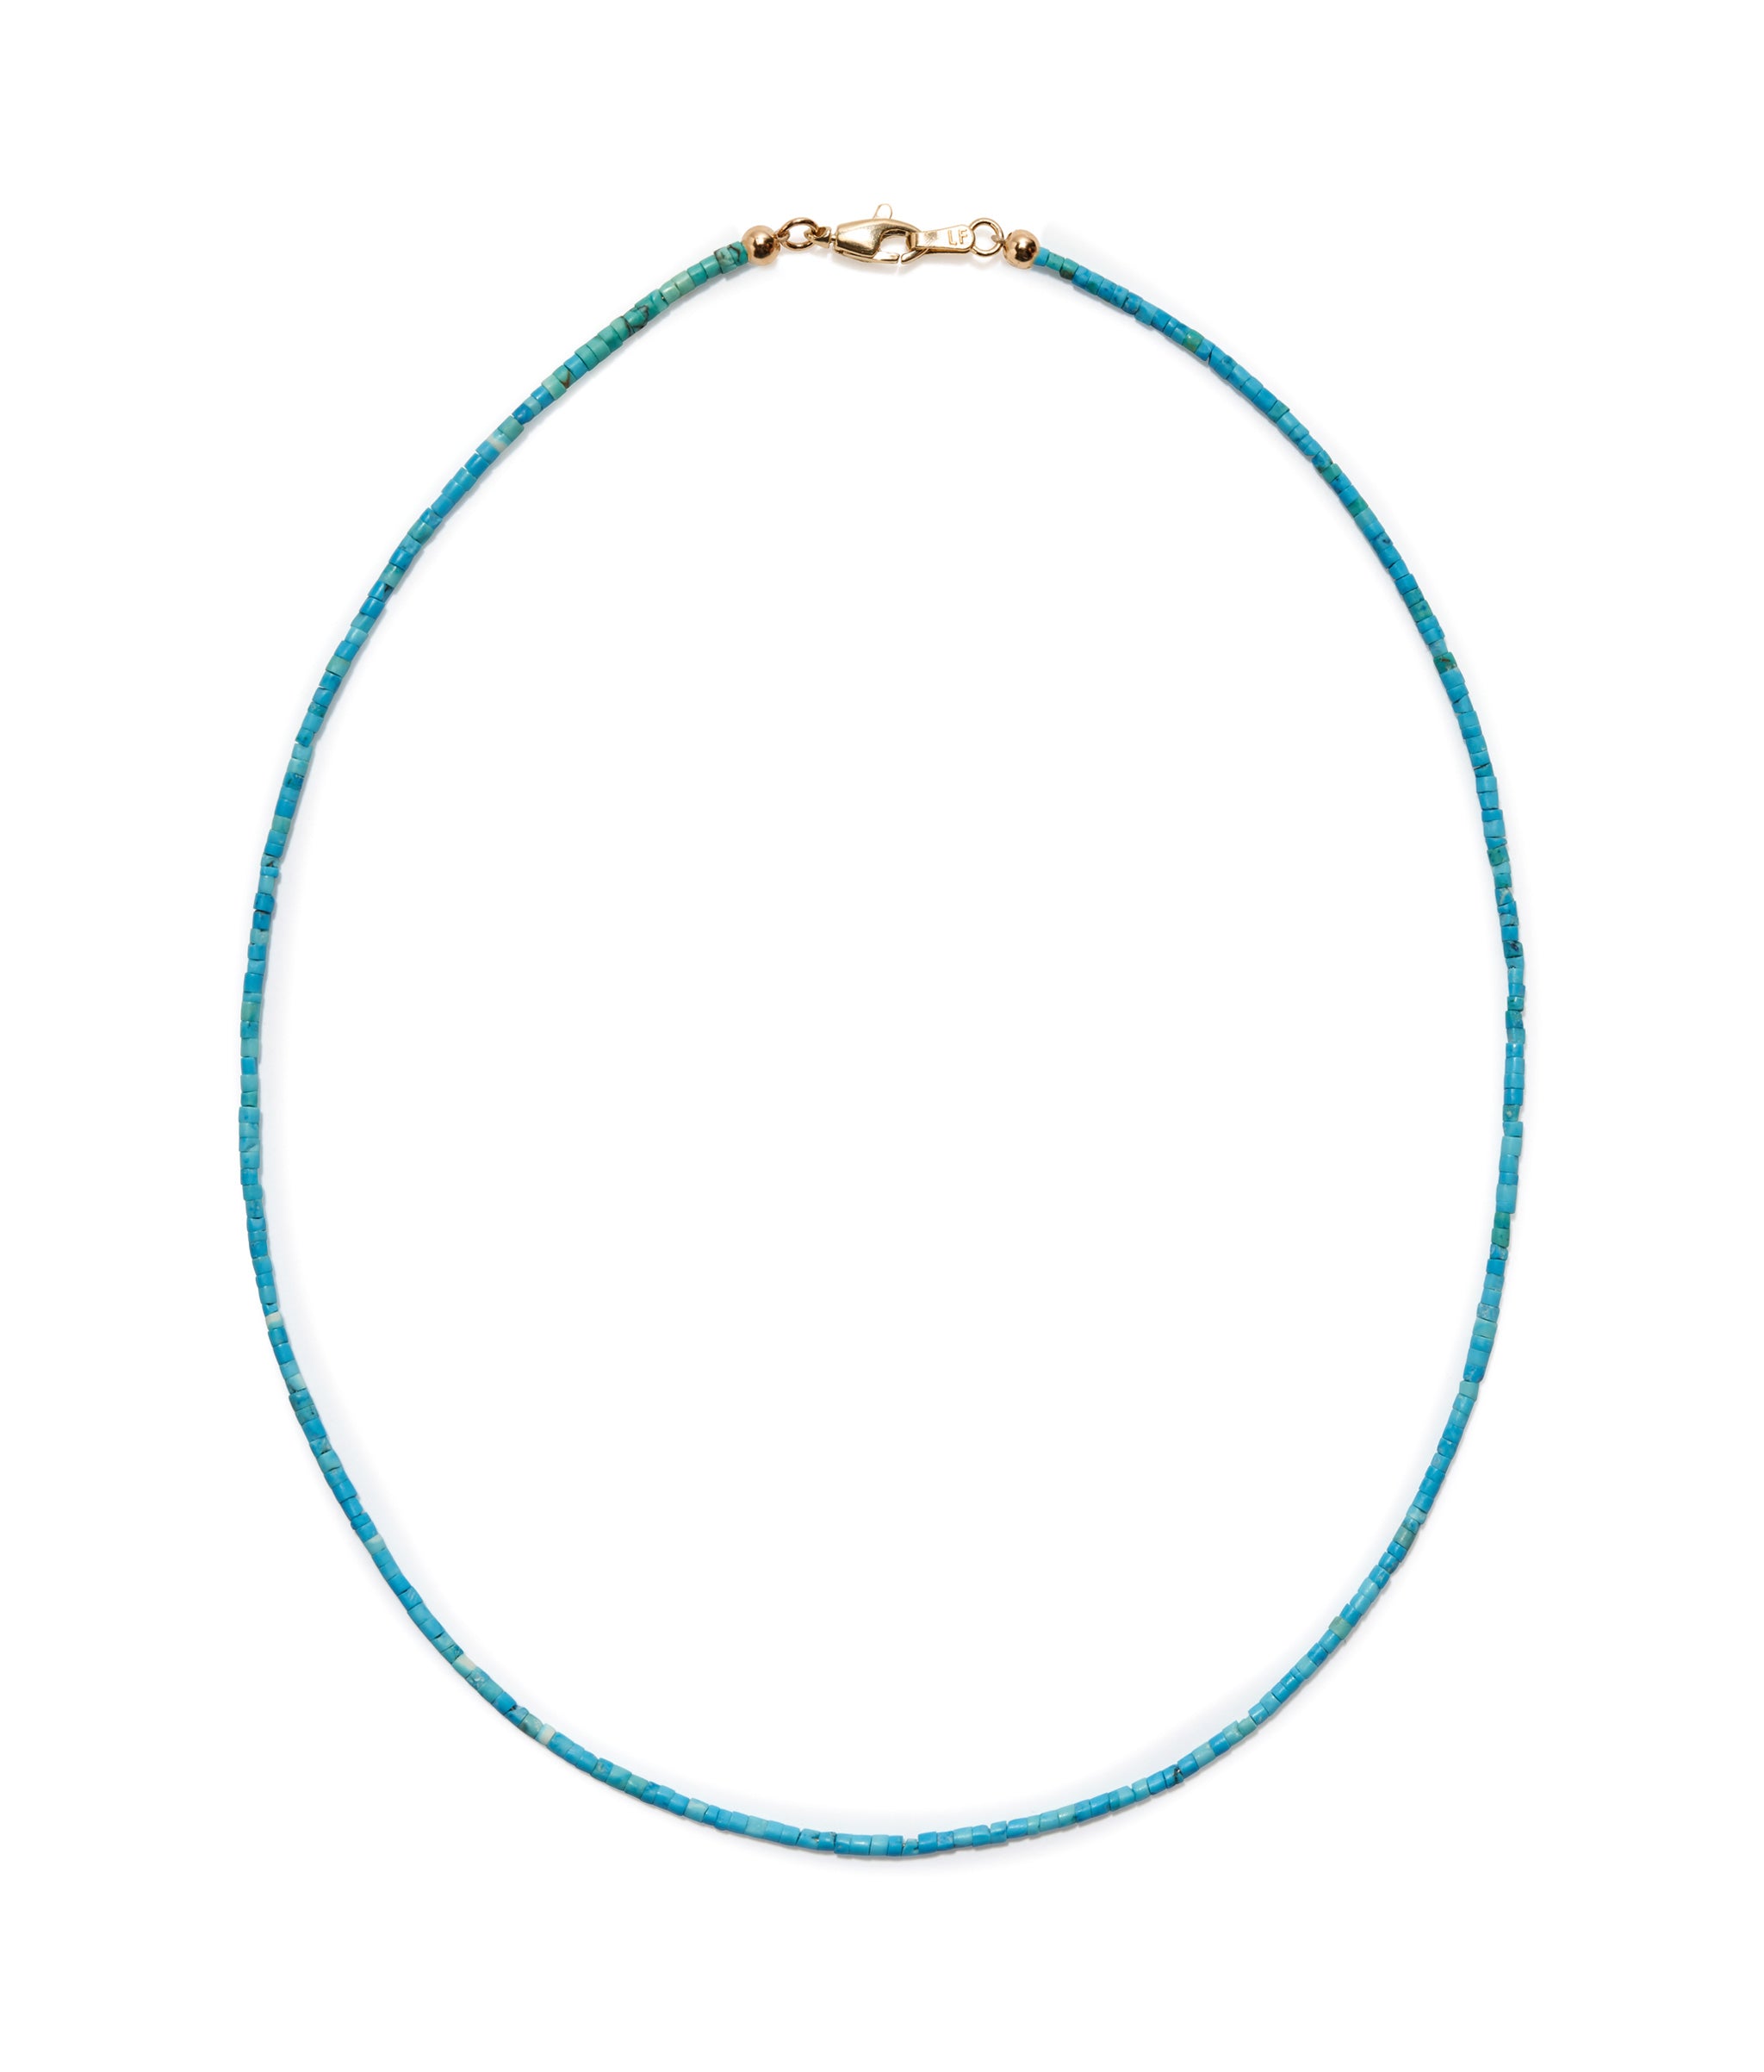 Tiny Turquoise and 14K Gold Necklace. Turquoise heishi beads with fine 14k gold closure.